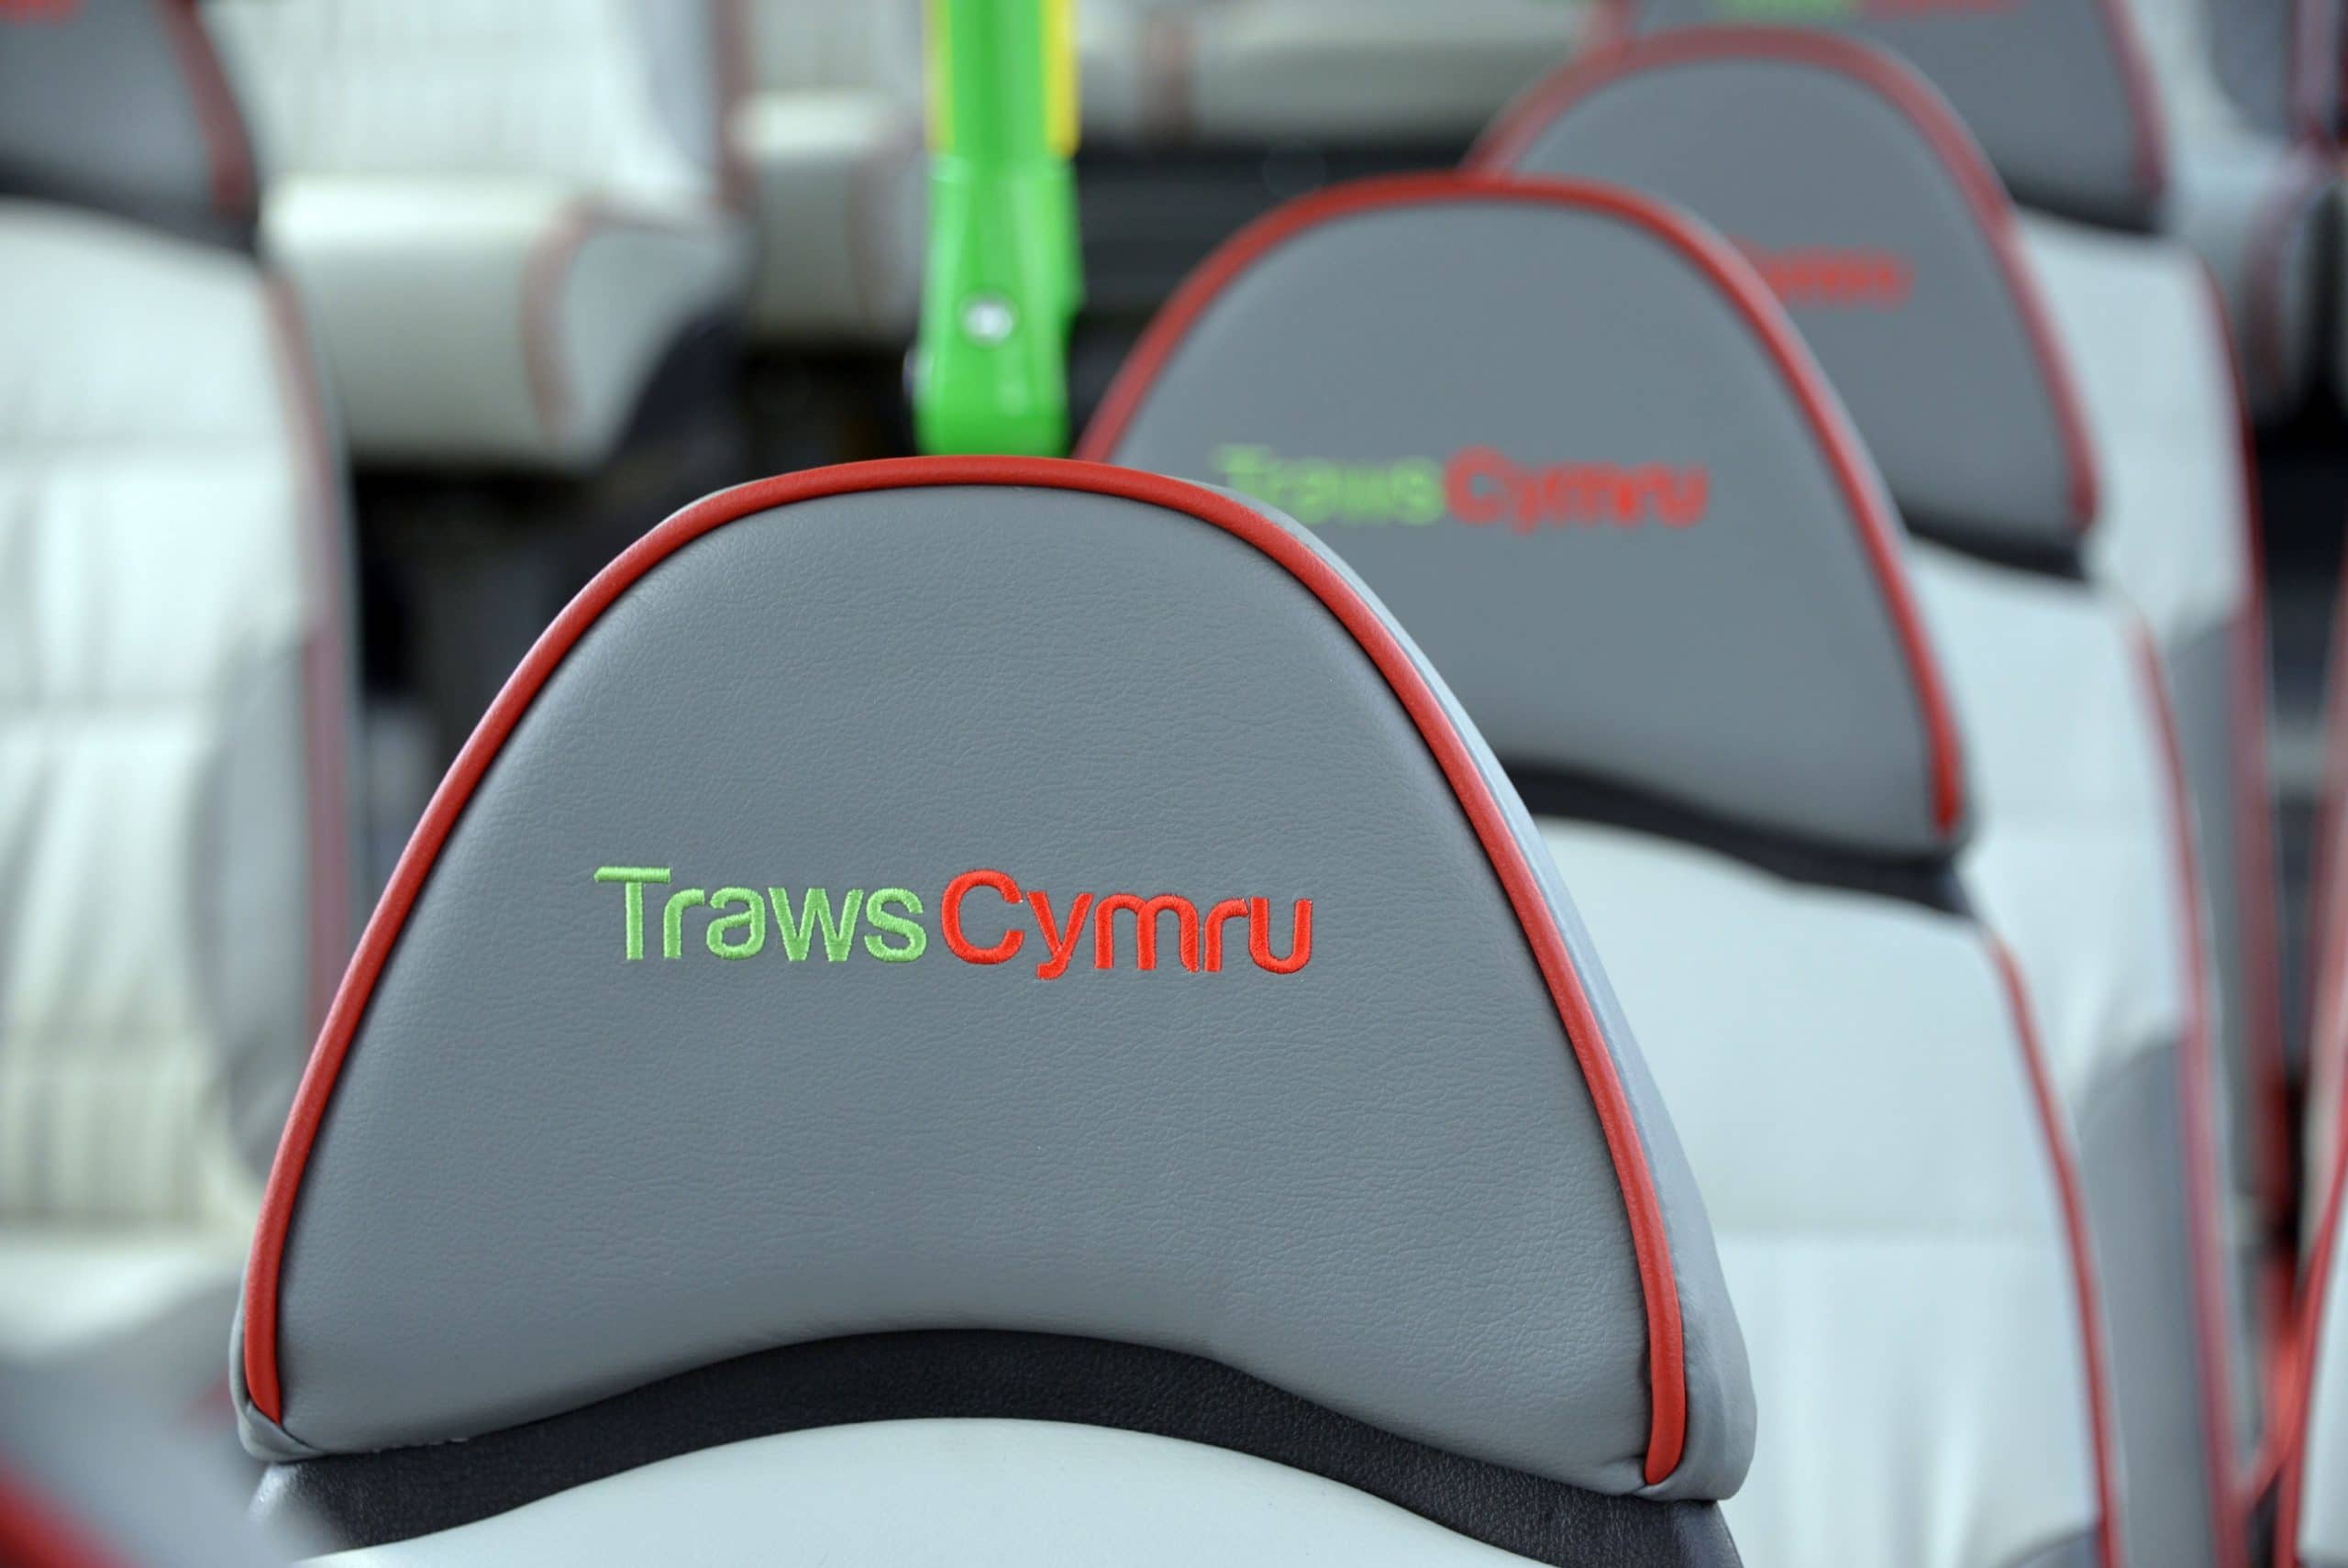 Use of all forward facing seats on buses in Wales agreed